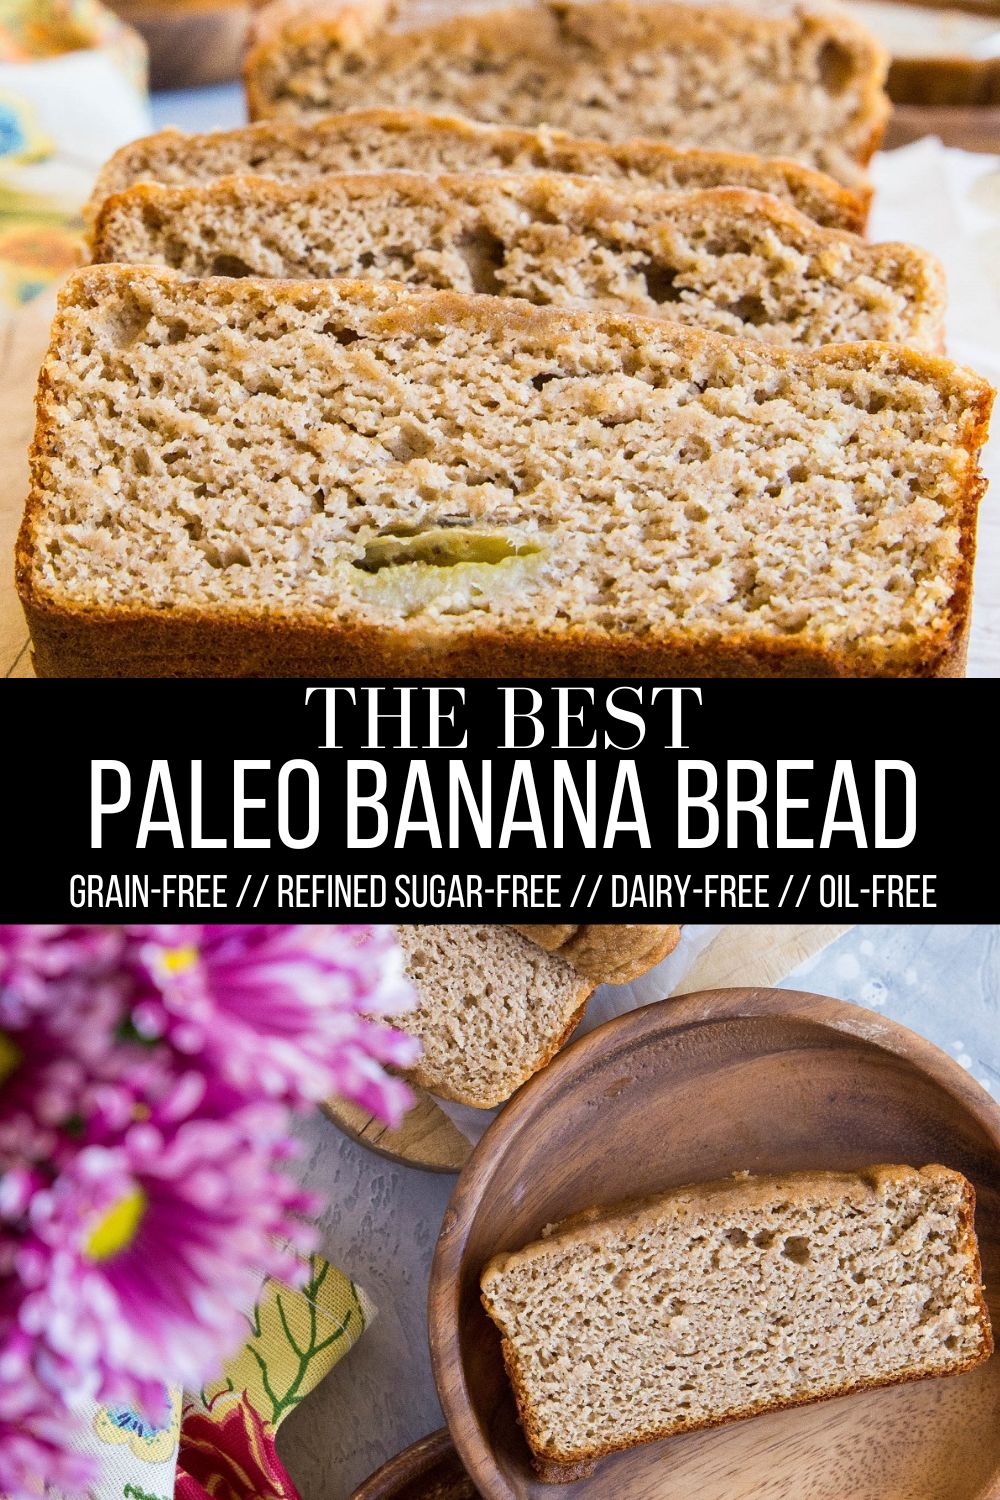 Healthy Almond Flour Paleo Banana Bread made grain-free, dairy-free, oil-free and refined sugar-free